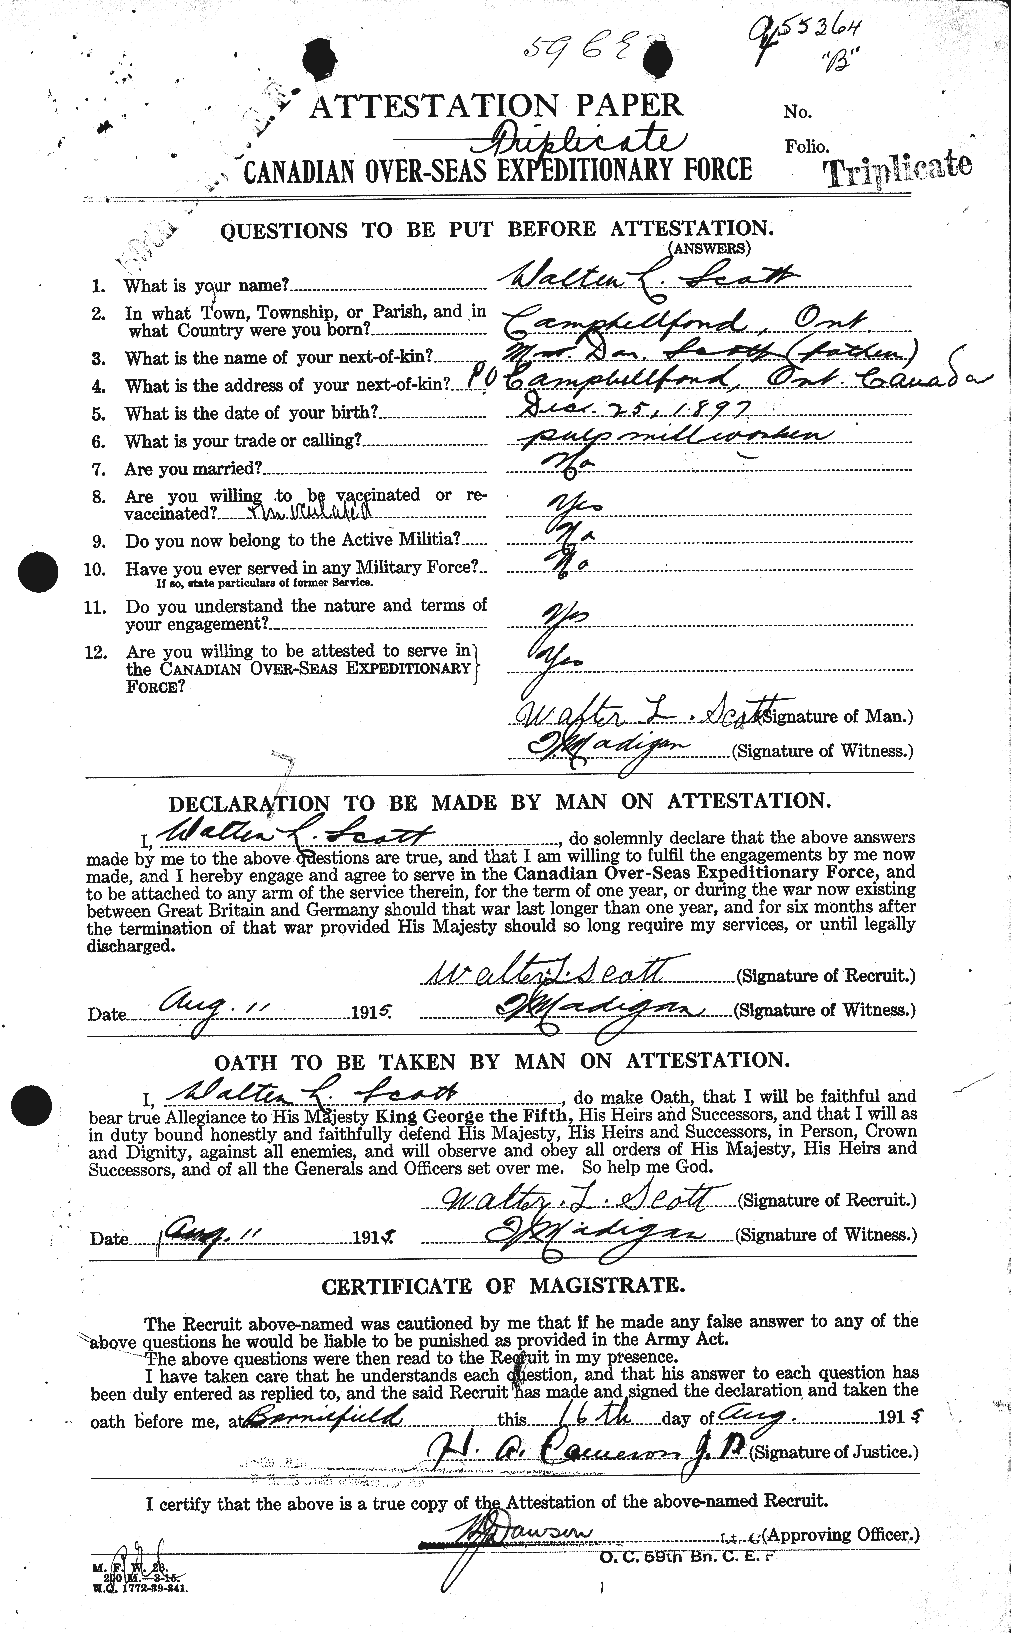 Personnel Records of the First World War - CEF 087972a